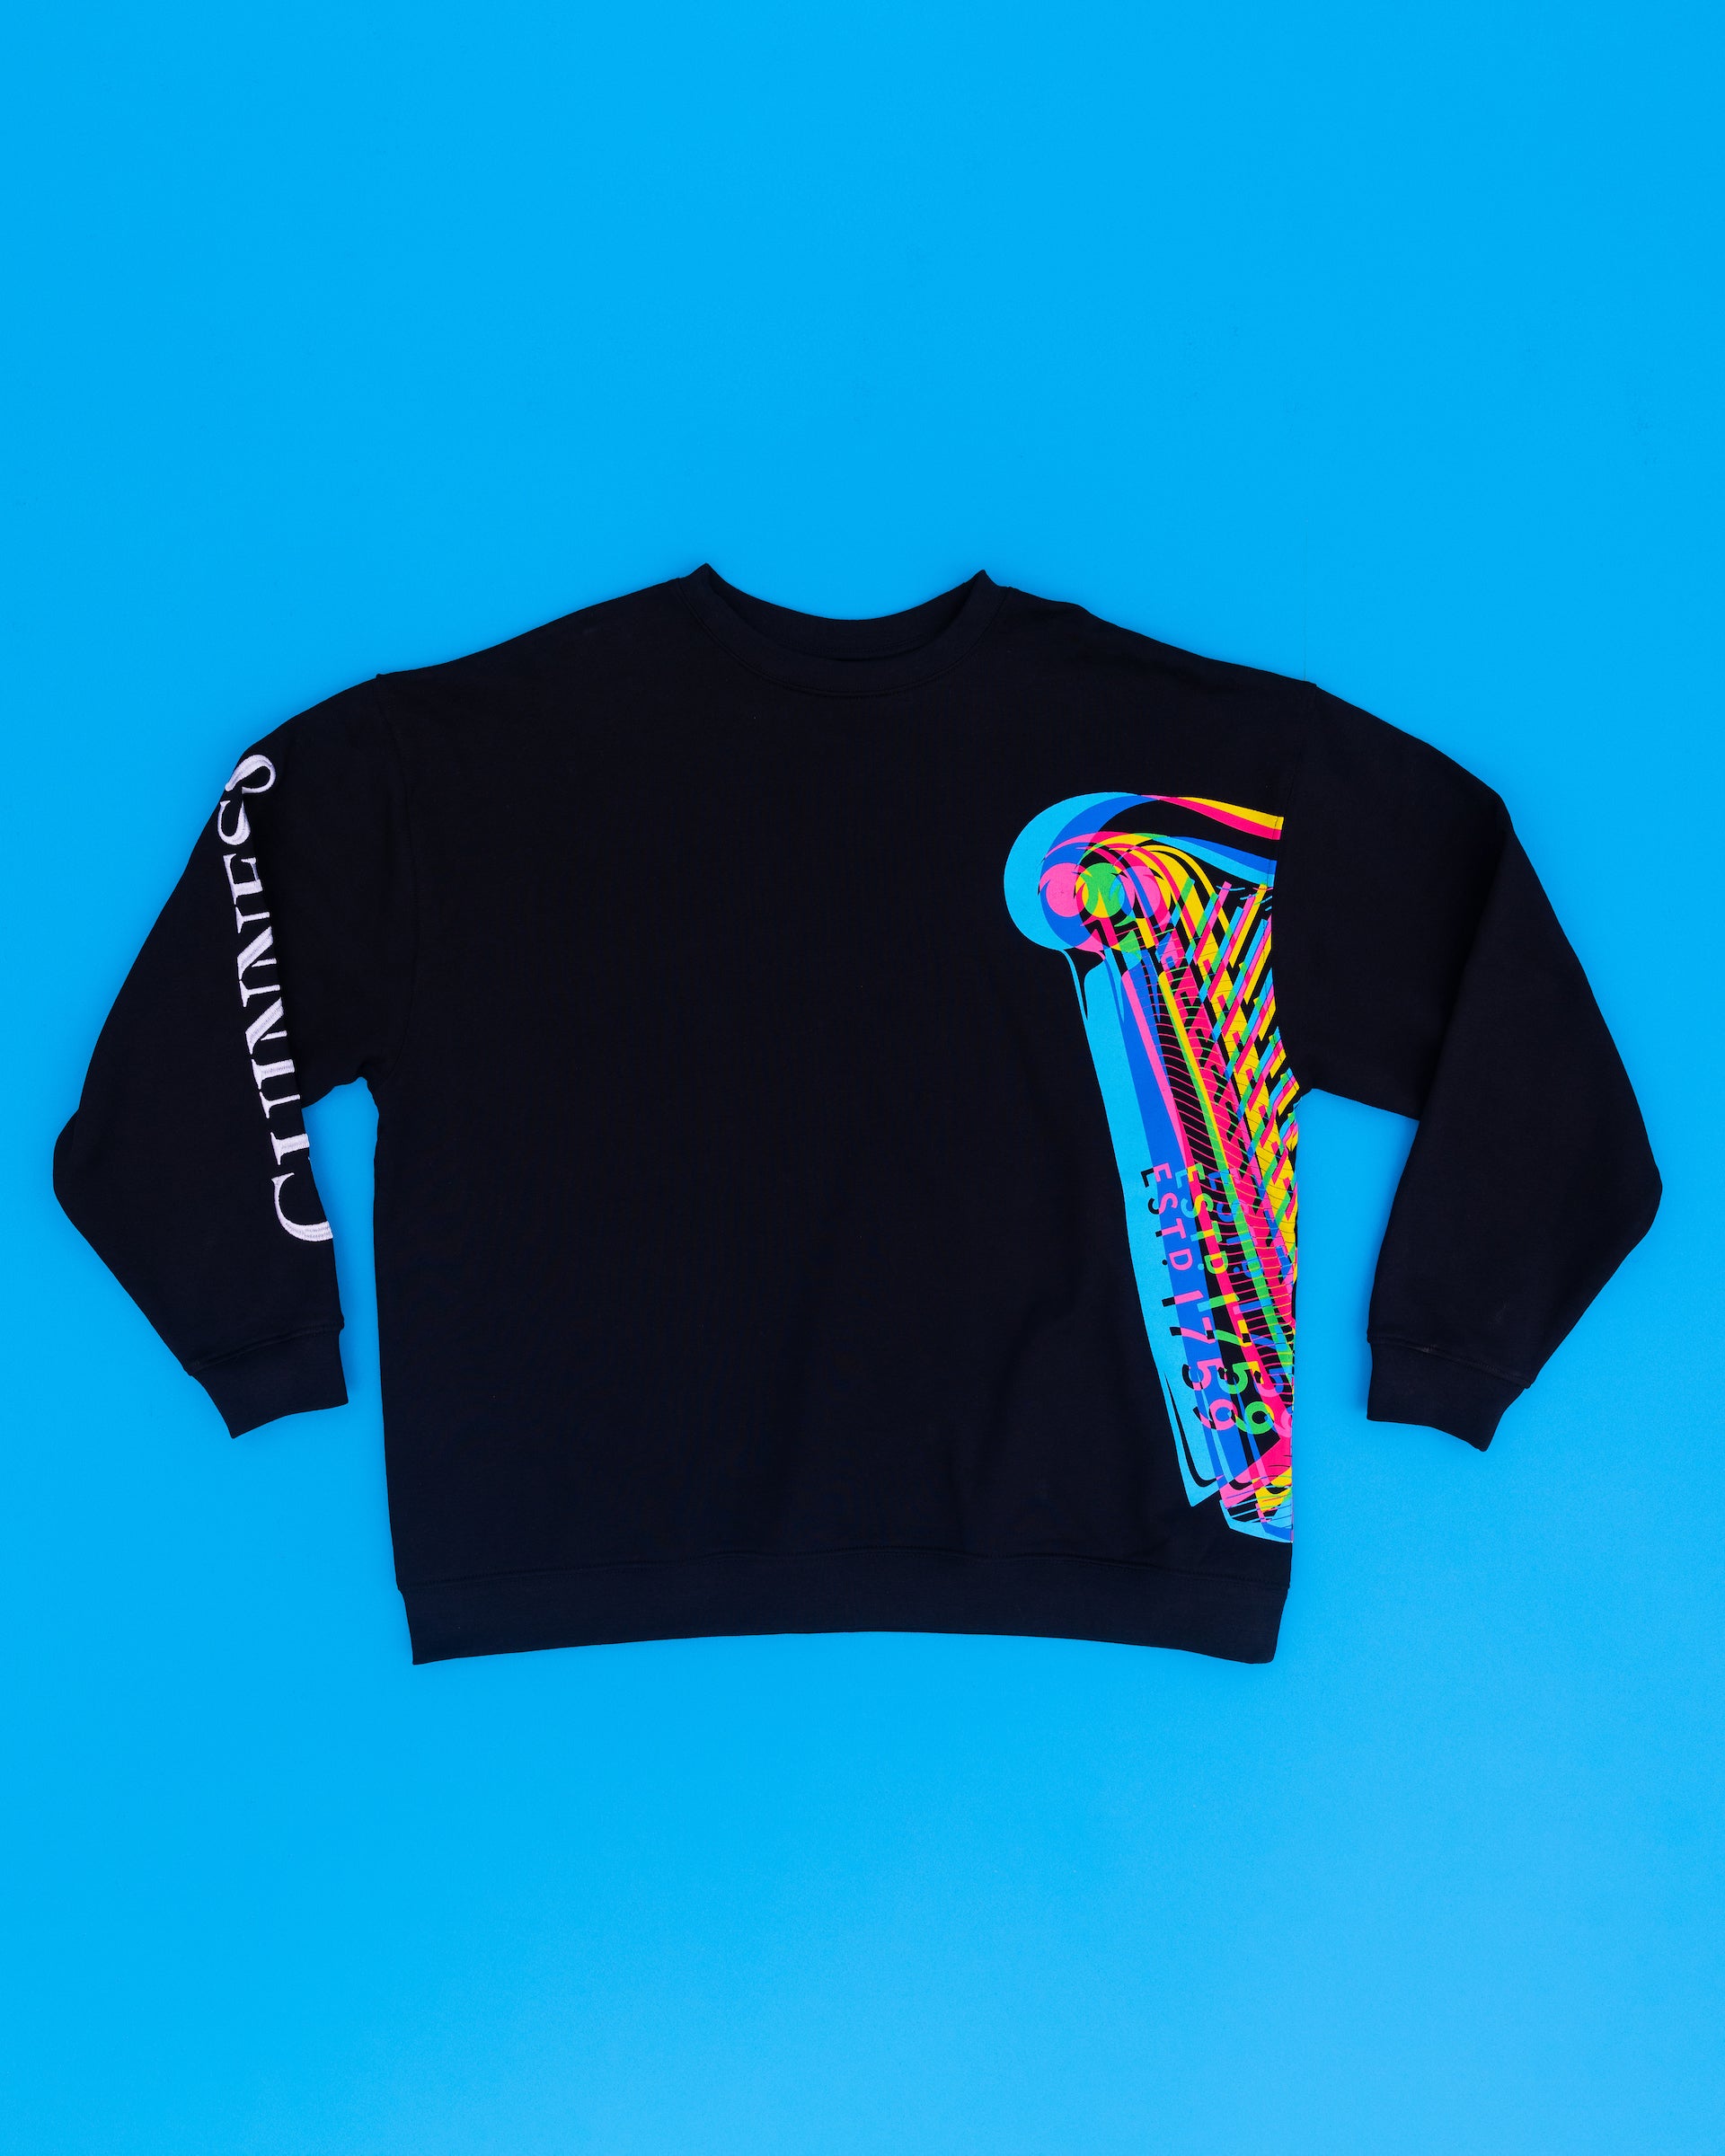 Black Sweatshirt designed by the Irish graffiti artist, Aches for Guinness Storehouse Exclusive. 100% organic cotton with quality print Guinness harp